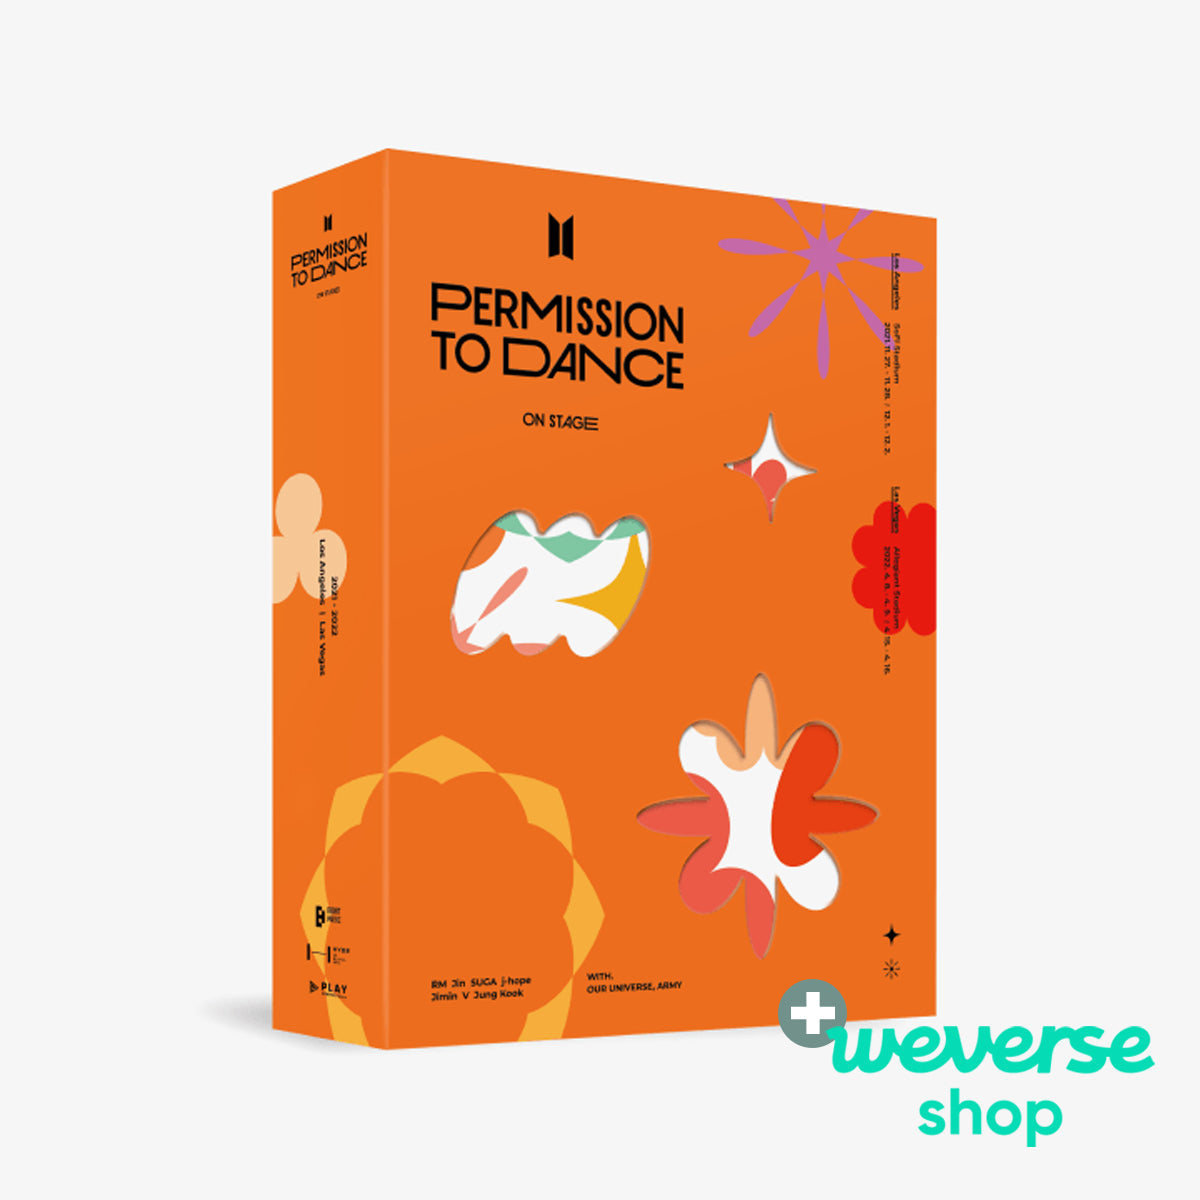 BTS - PERMISSION TO DANCE ON STAGE in THE US + Weverse Shop P.O.B